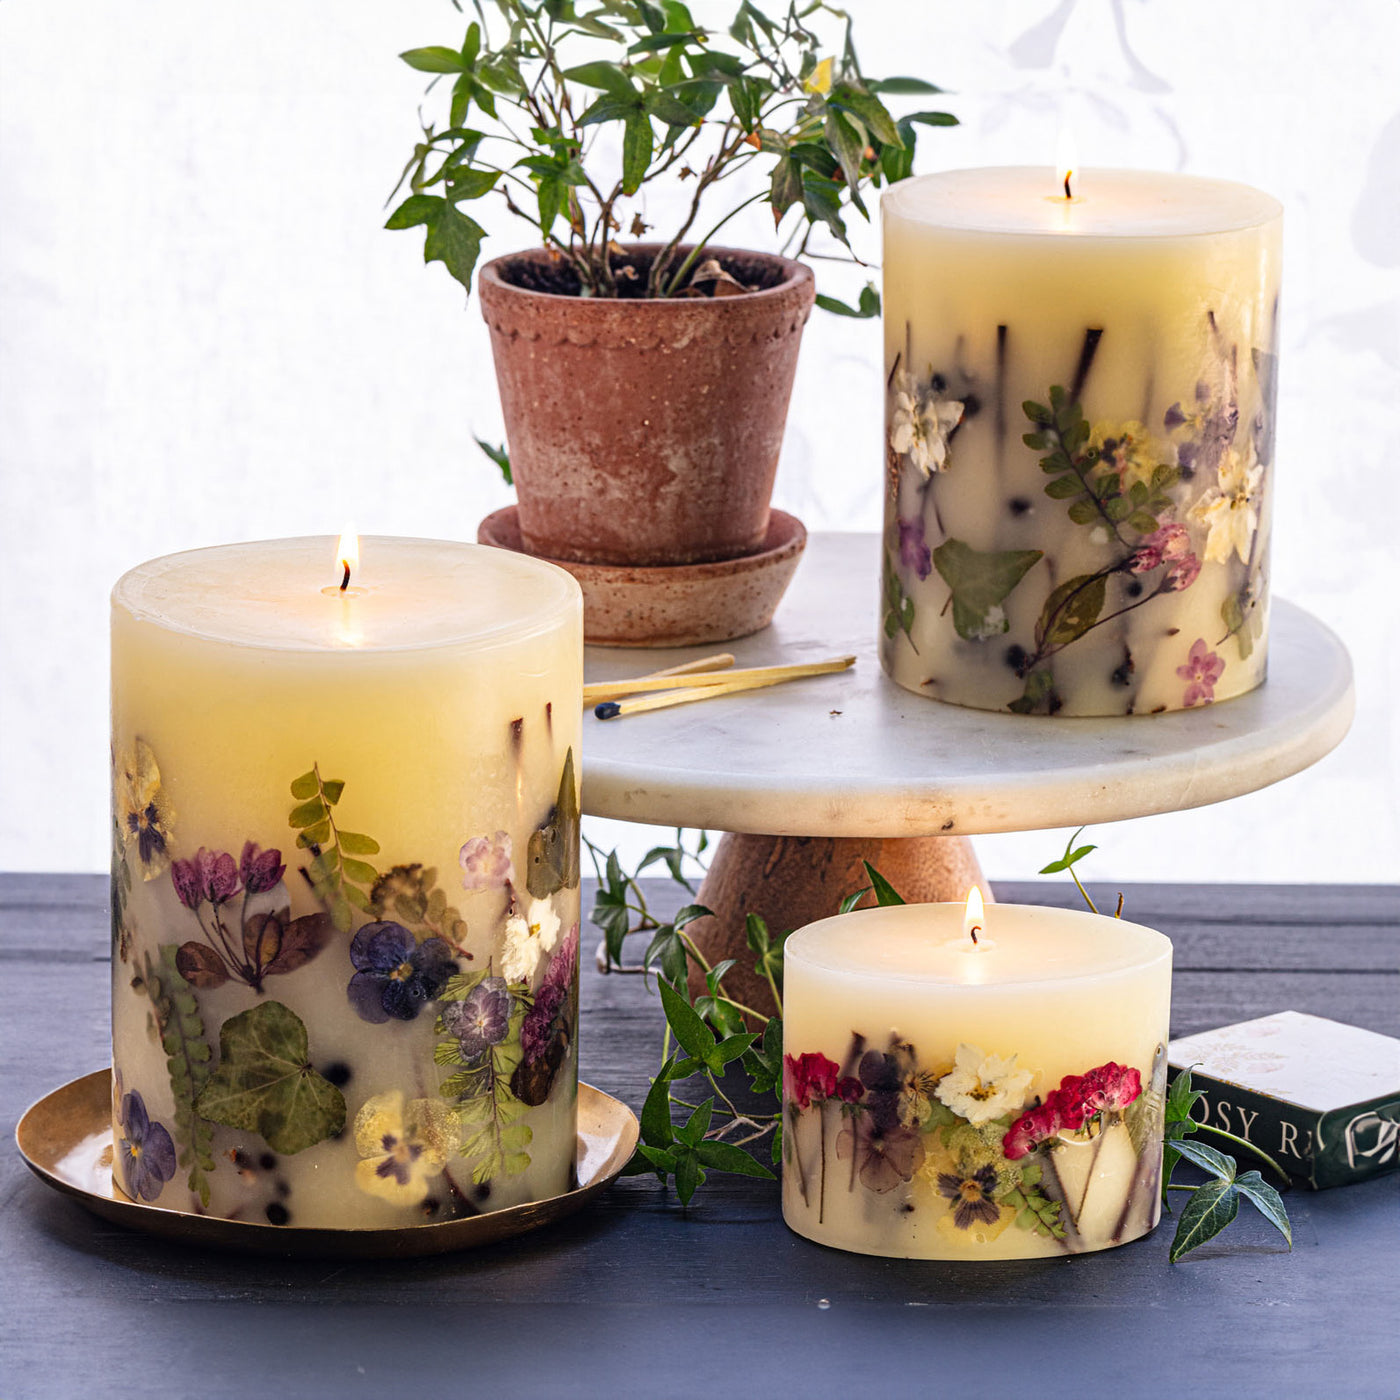 Black Currant + Bay Small Round Botanical Candle